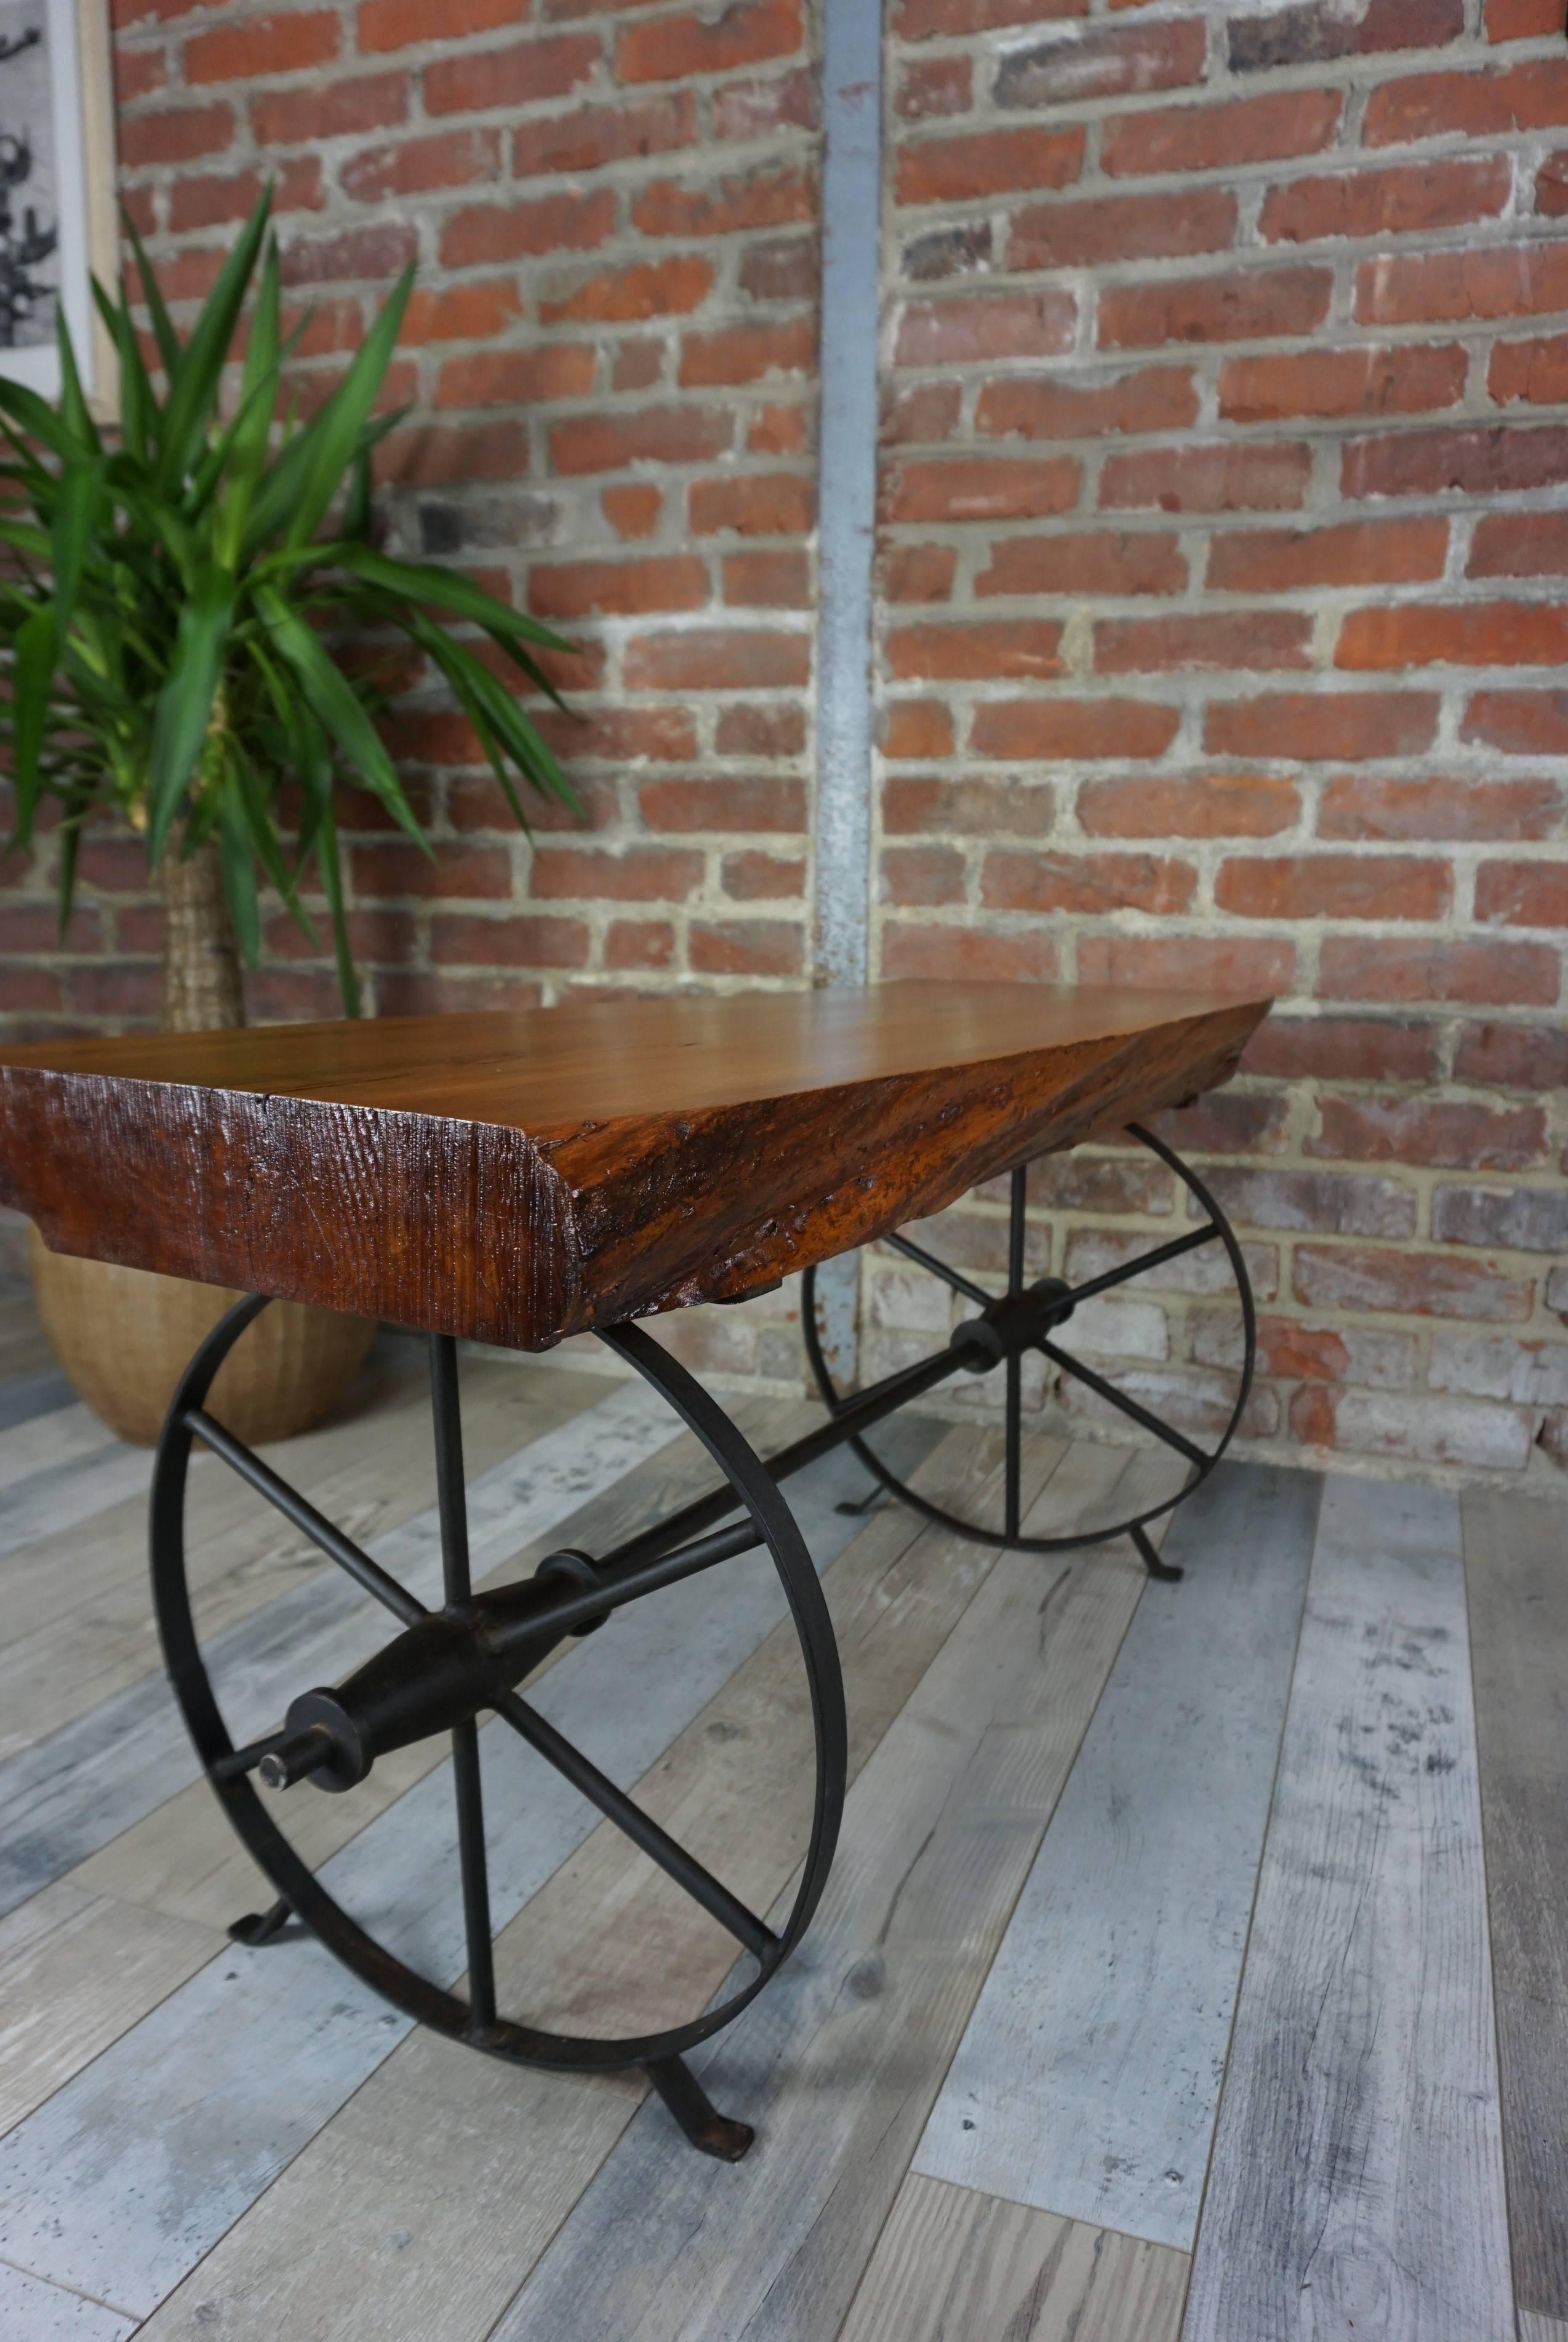 Of course the wheels are fixed, but it gives it a charm. Solid wood tray and iron structure. Industrial style and vintage design!